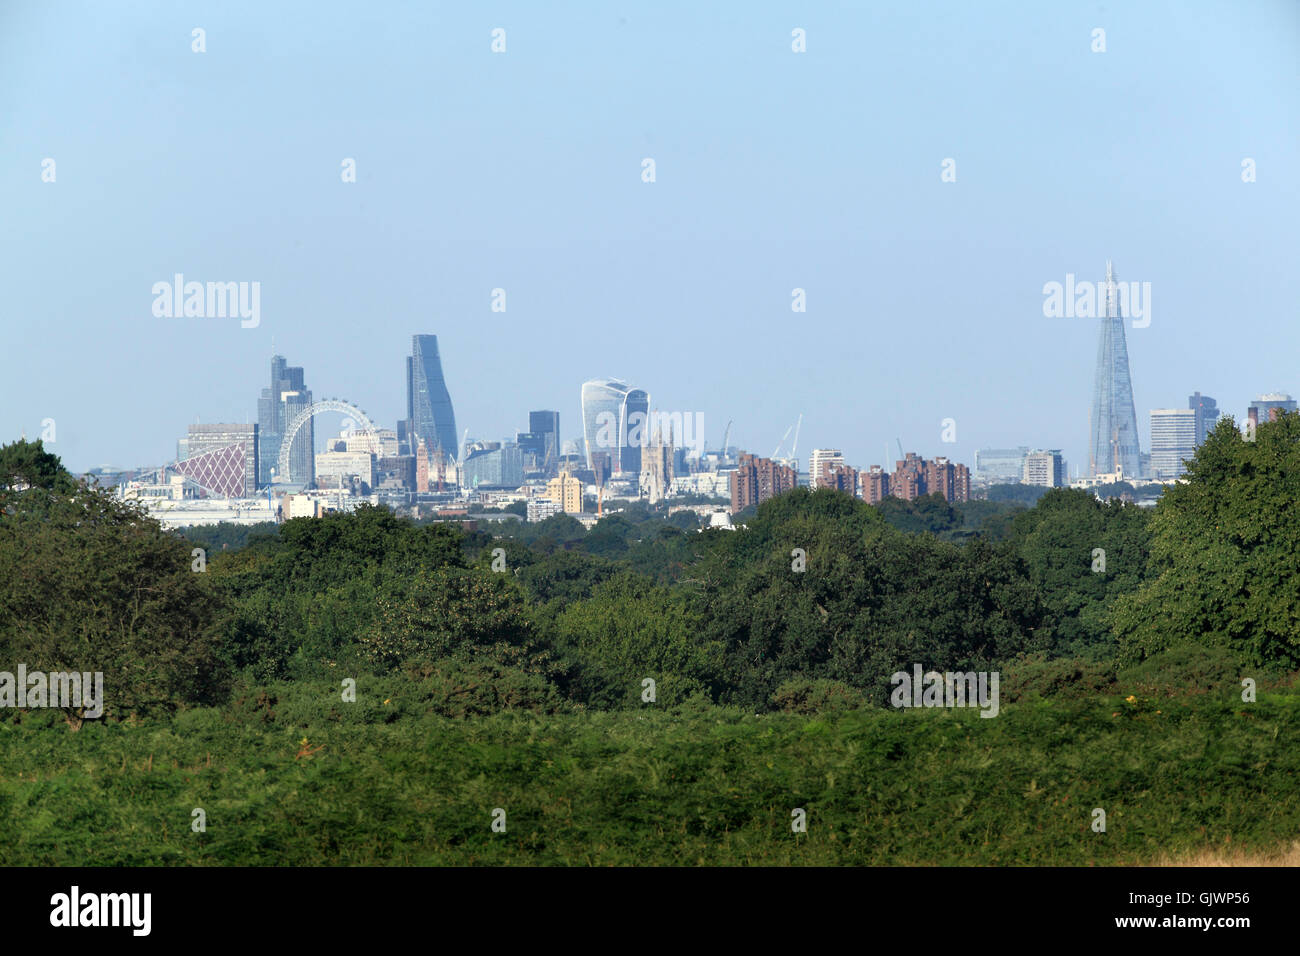 Skyline of London taken from Richmond Park on a beautiful clear august day Stock Photo